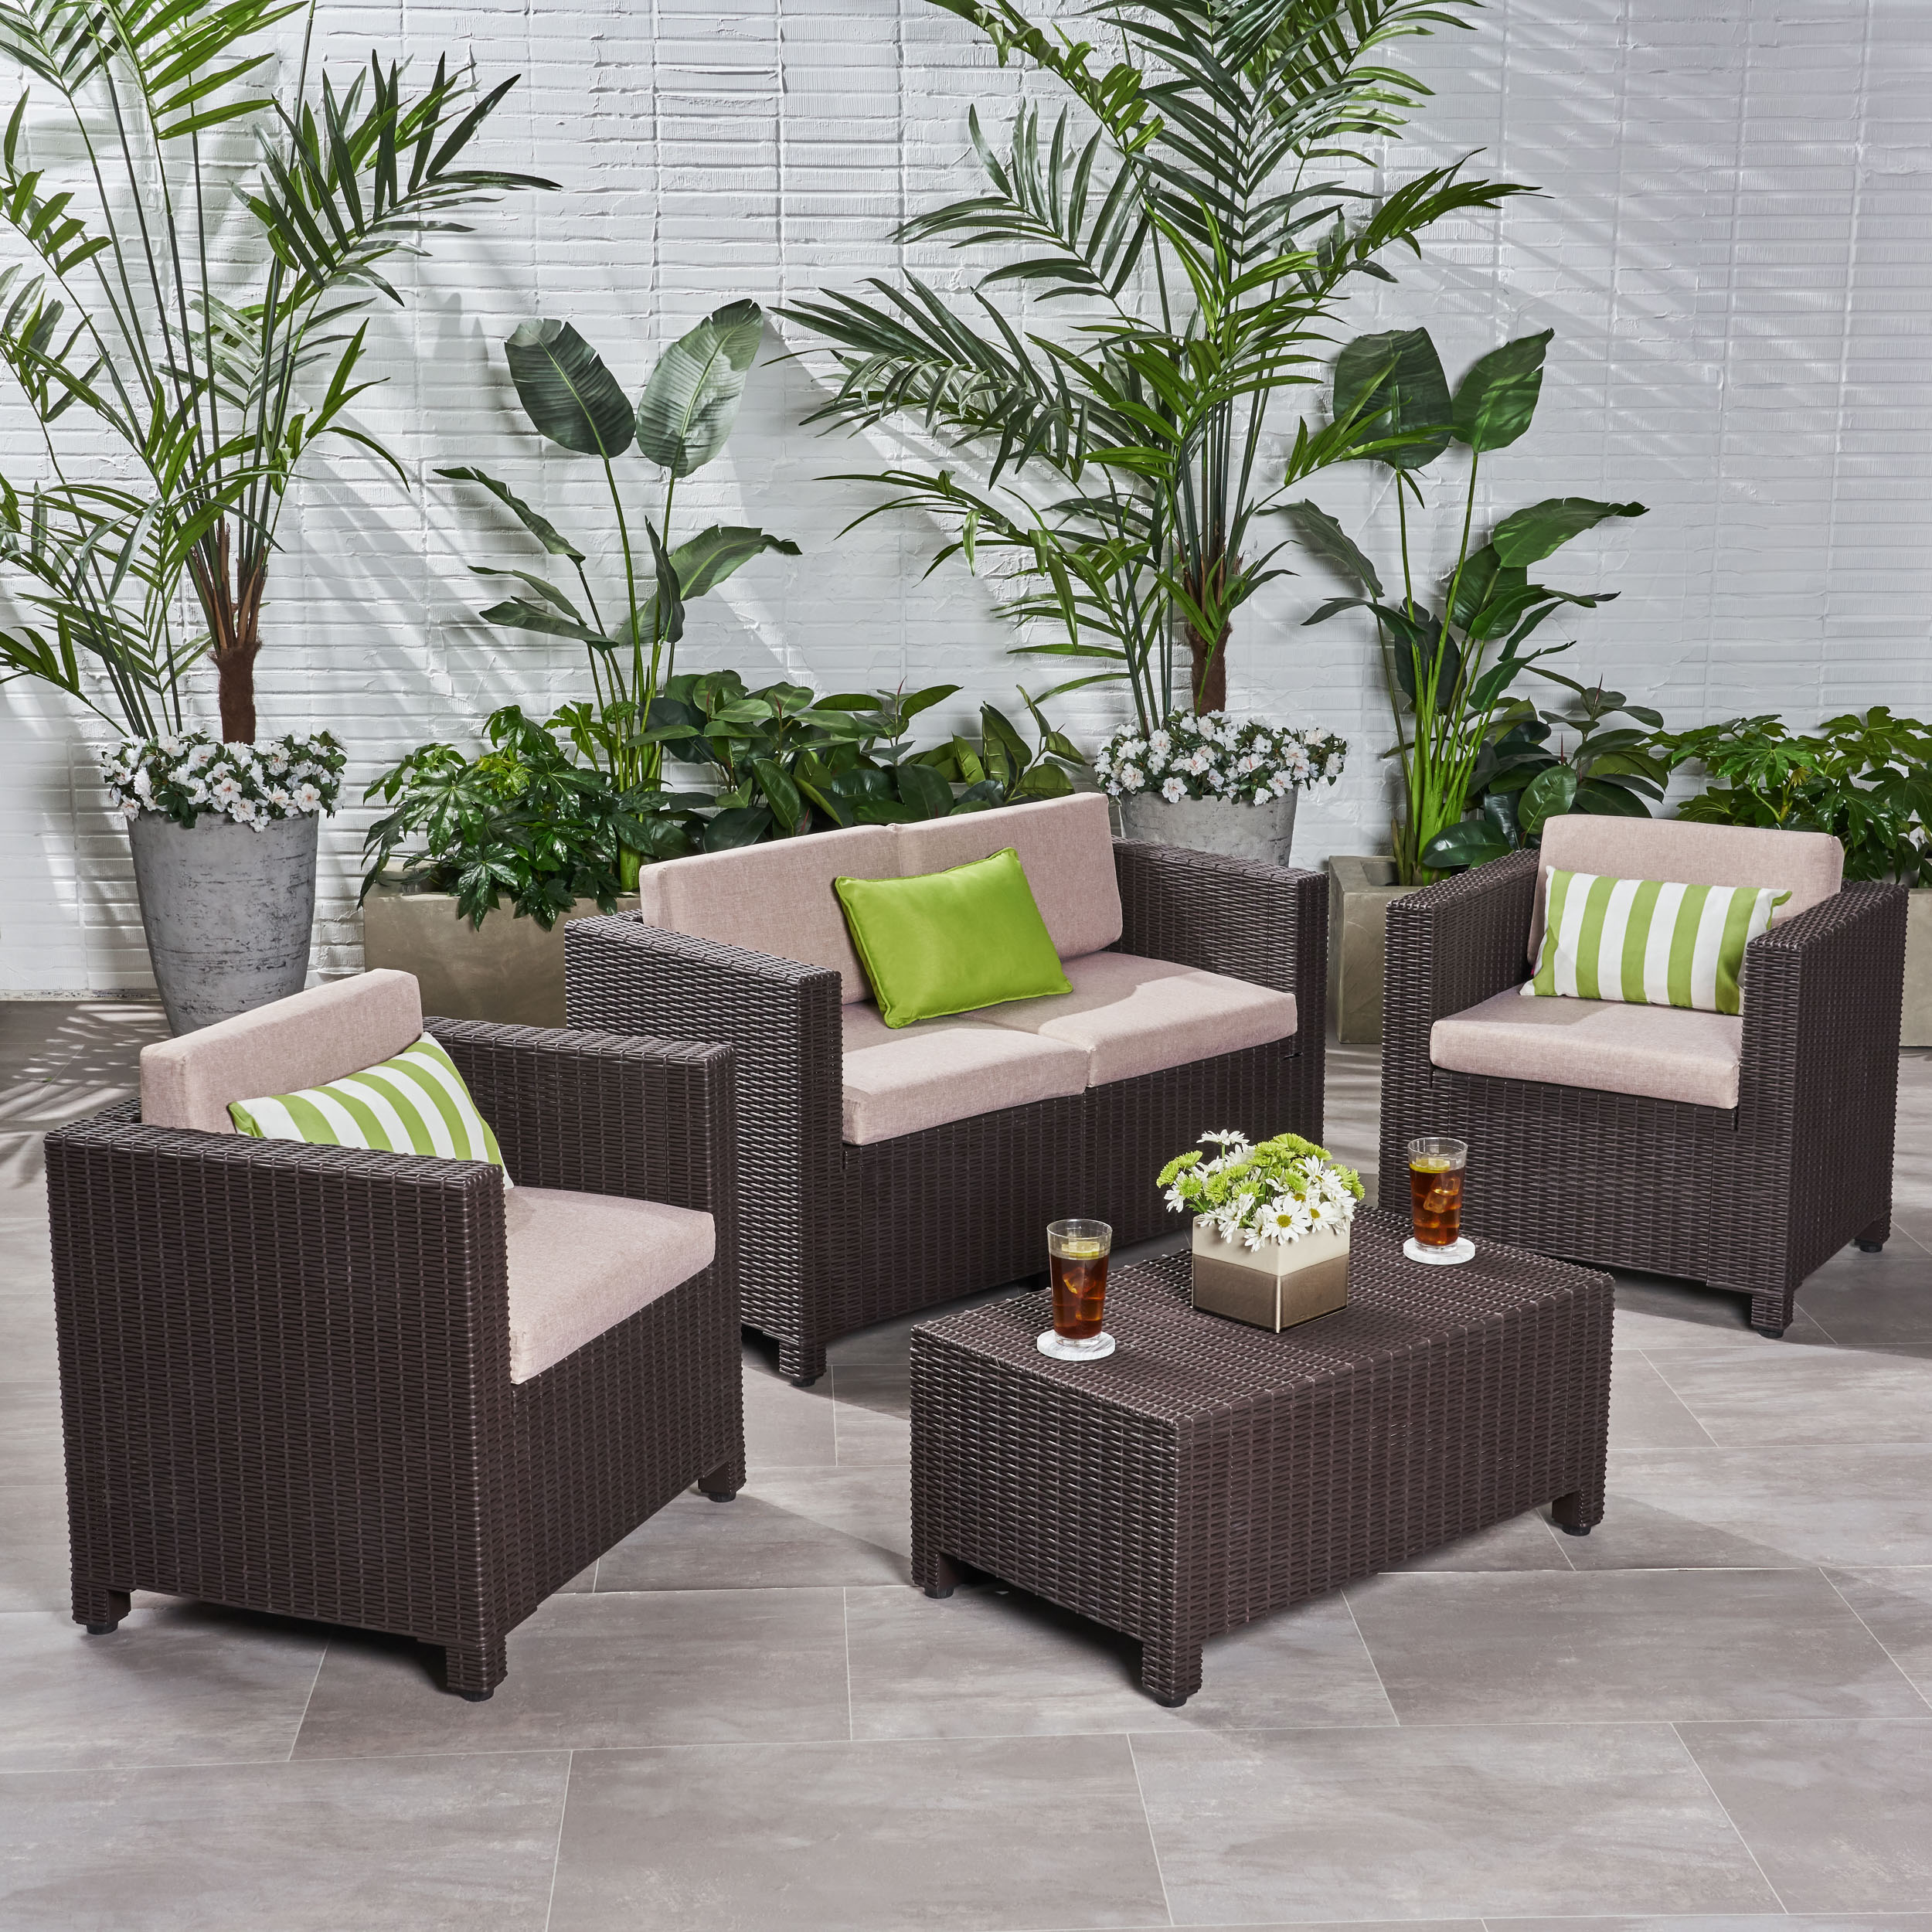 Primrose Outdoor 4-Piece All Weather Faux Wicker Chat Set with Cushions, Dark Brown, Beige - image 1 of 7